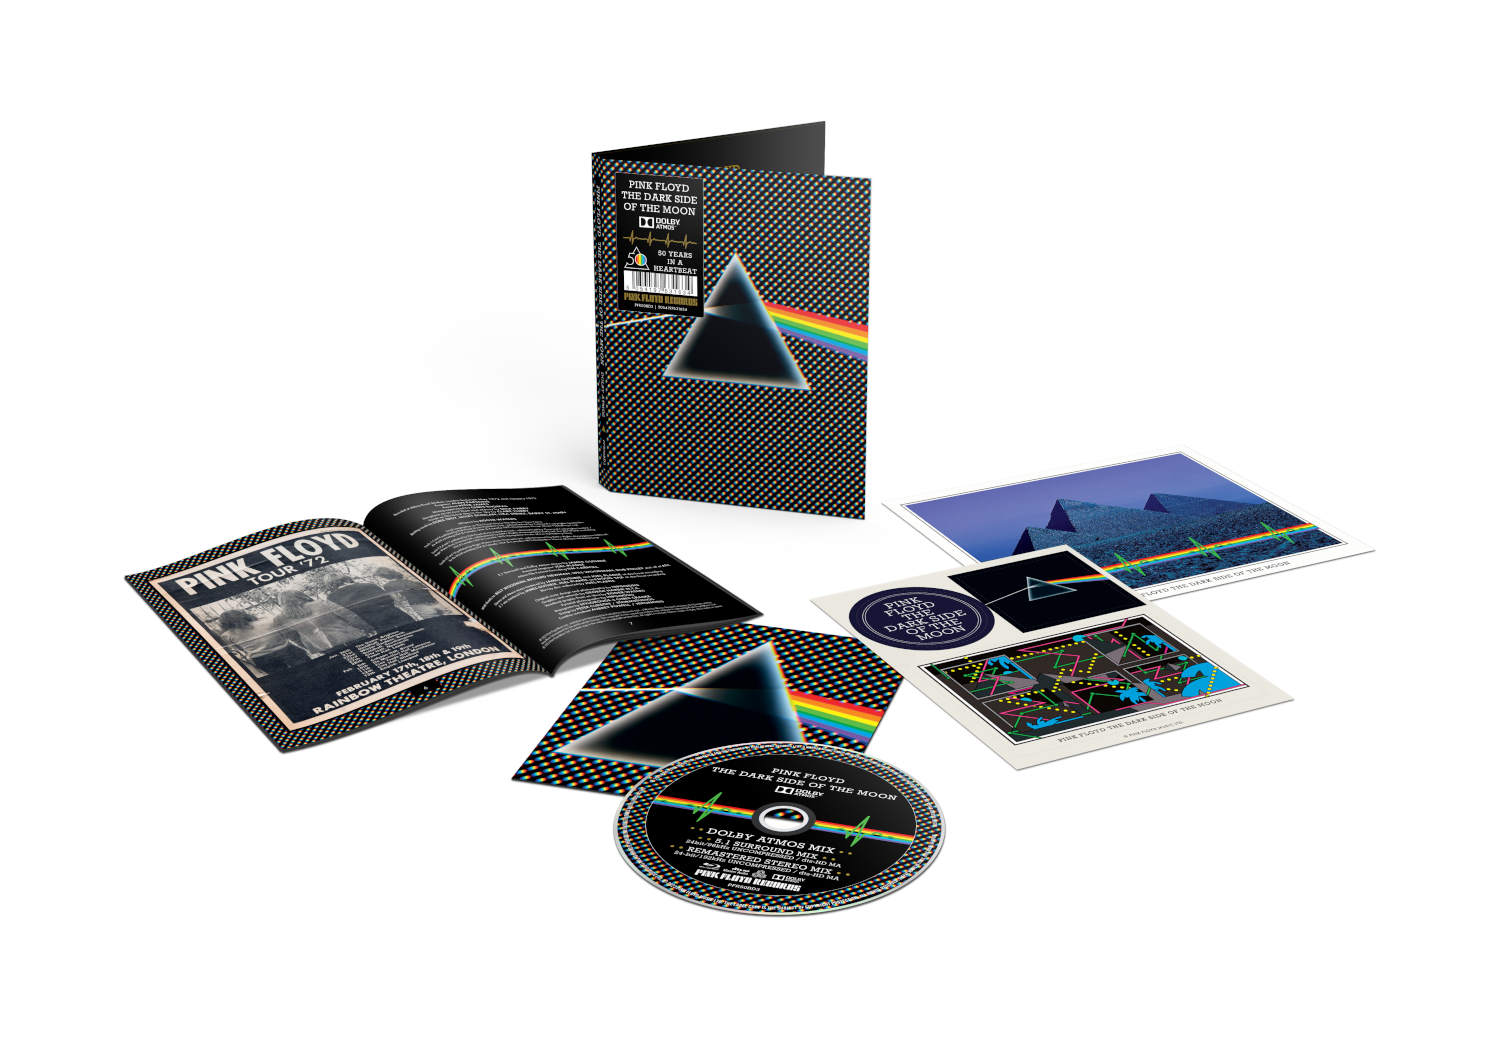 Pink Floyd announce standalone bluray of The Dark Side of the Moon